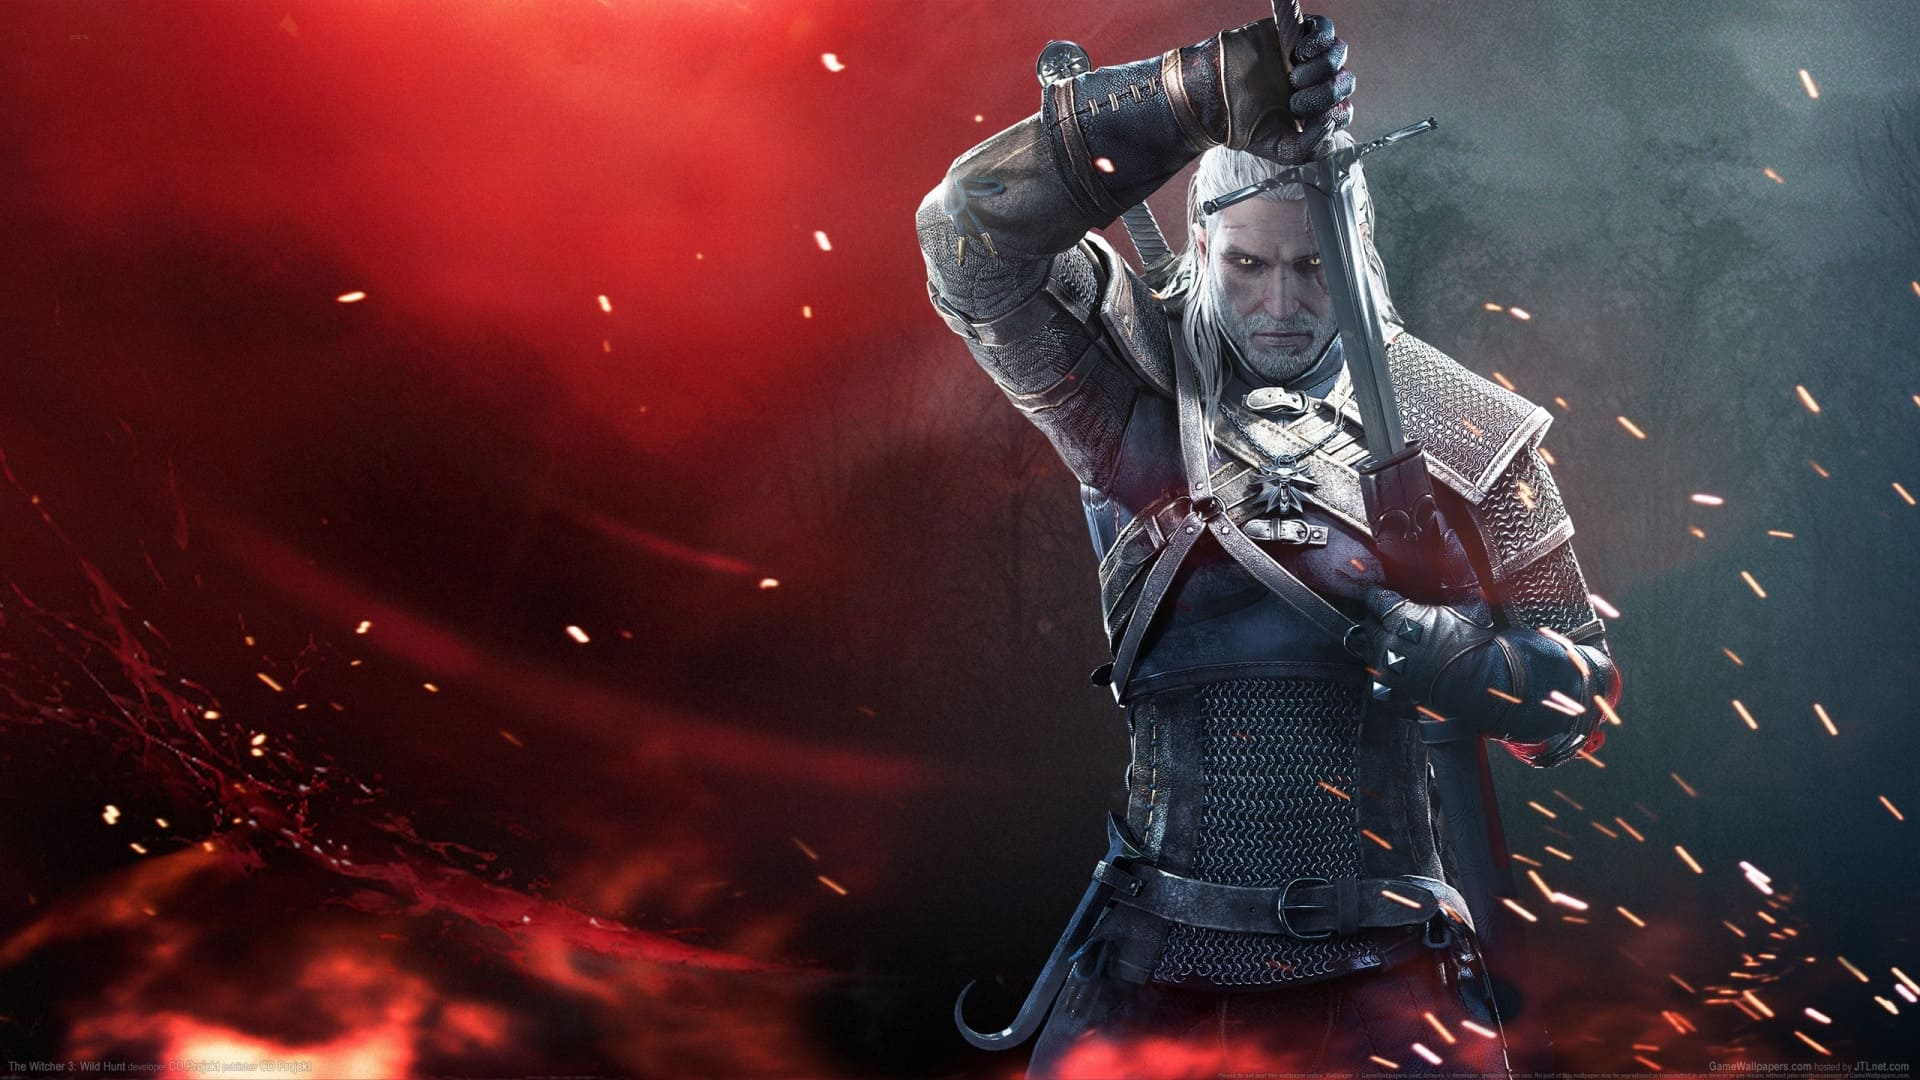 1920x1080 The Witcher 3 Wallpapers Top 35 Best The Witcher 3 Backgrounds Download